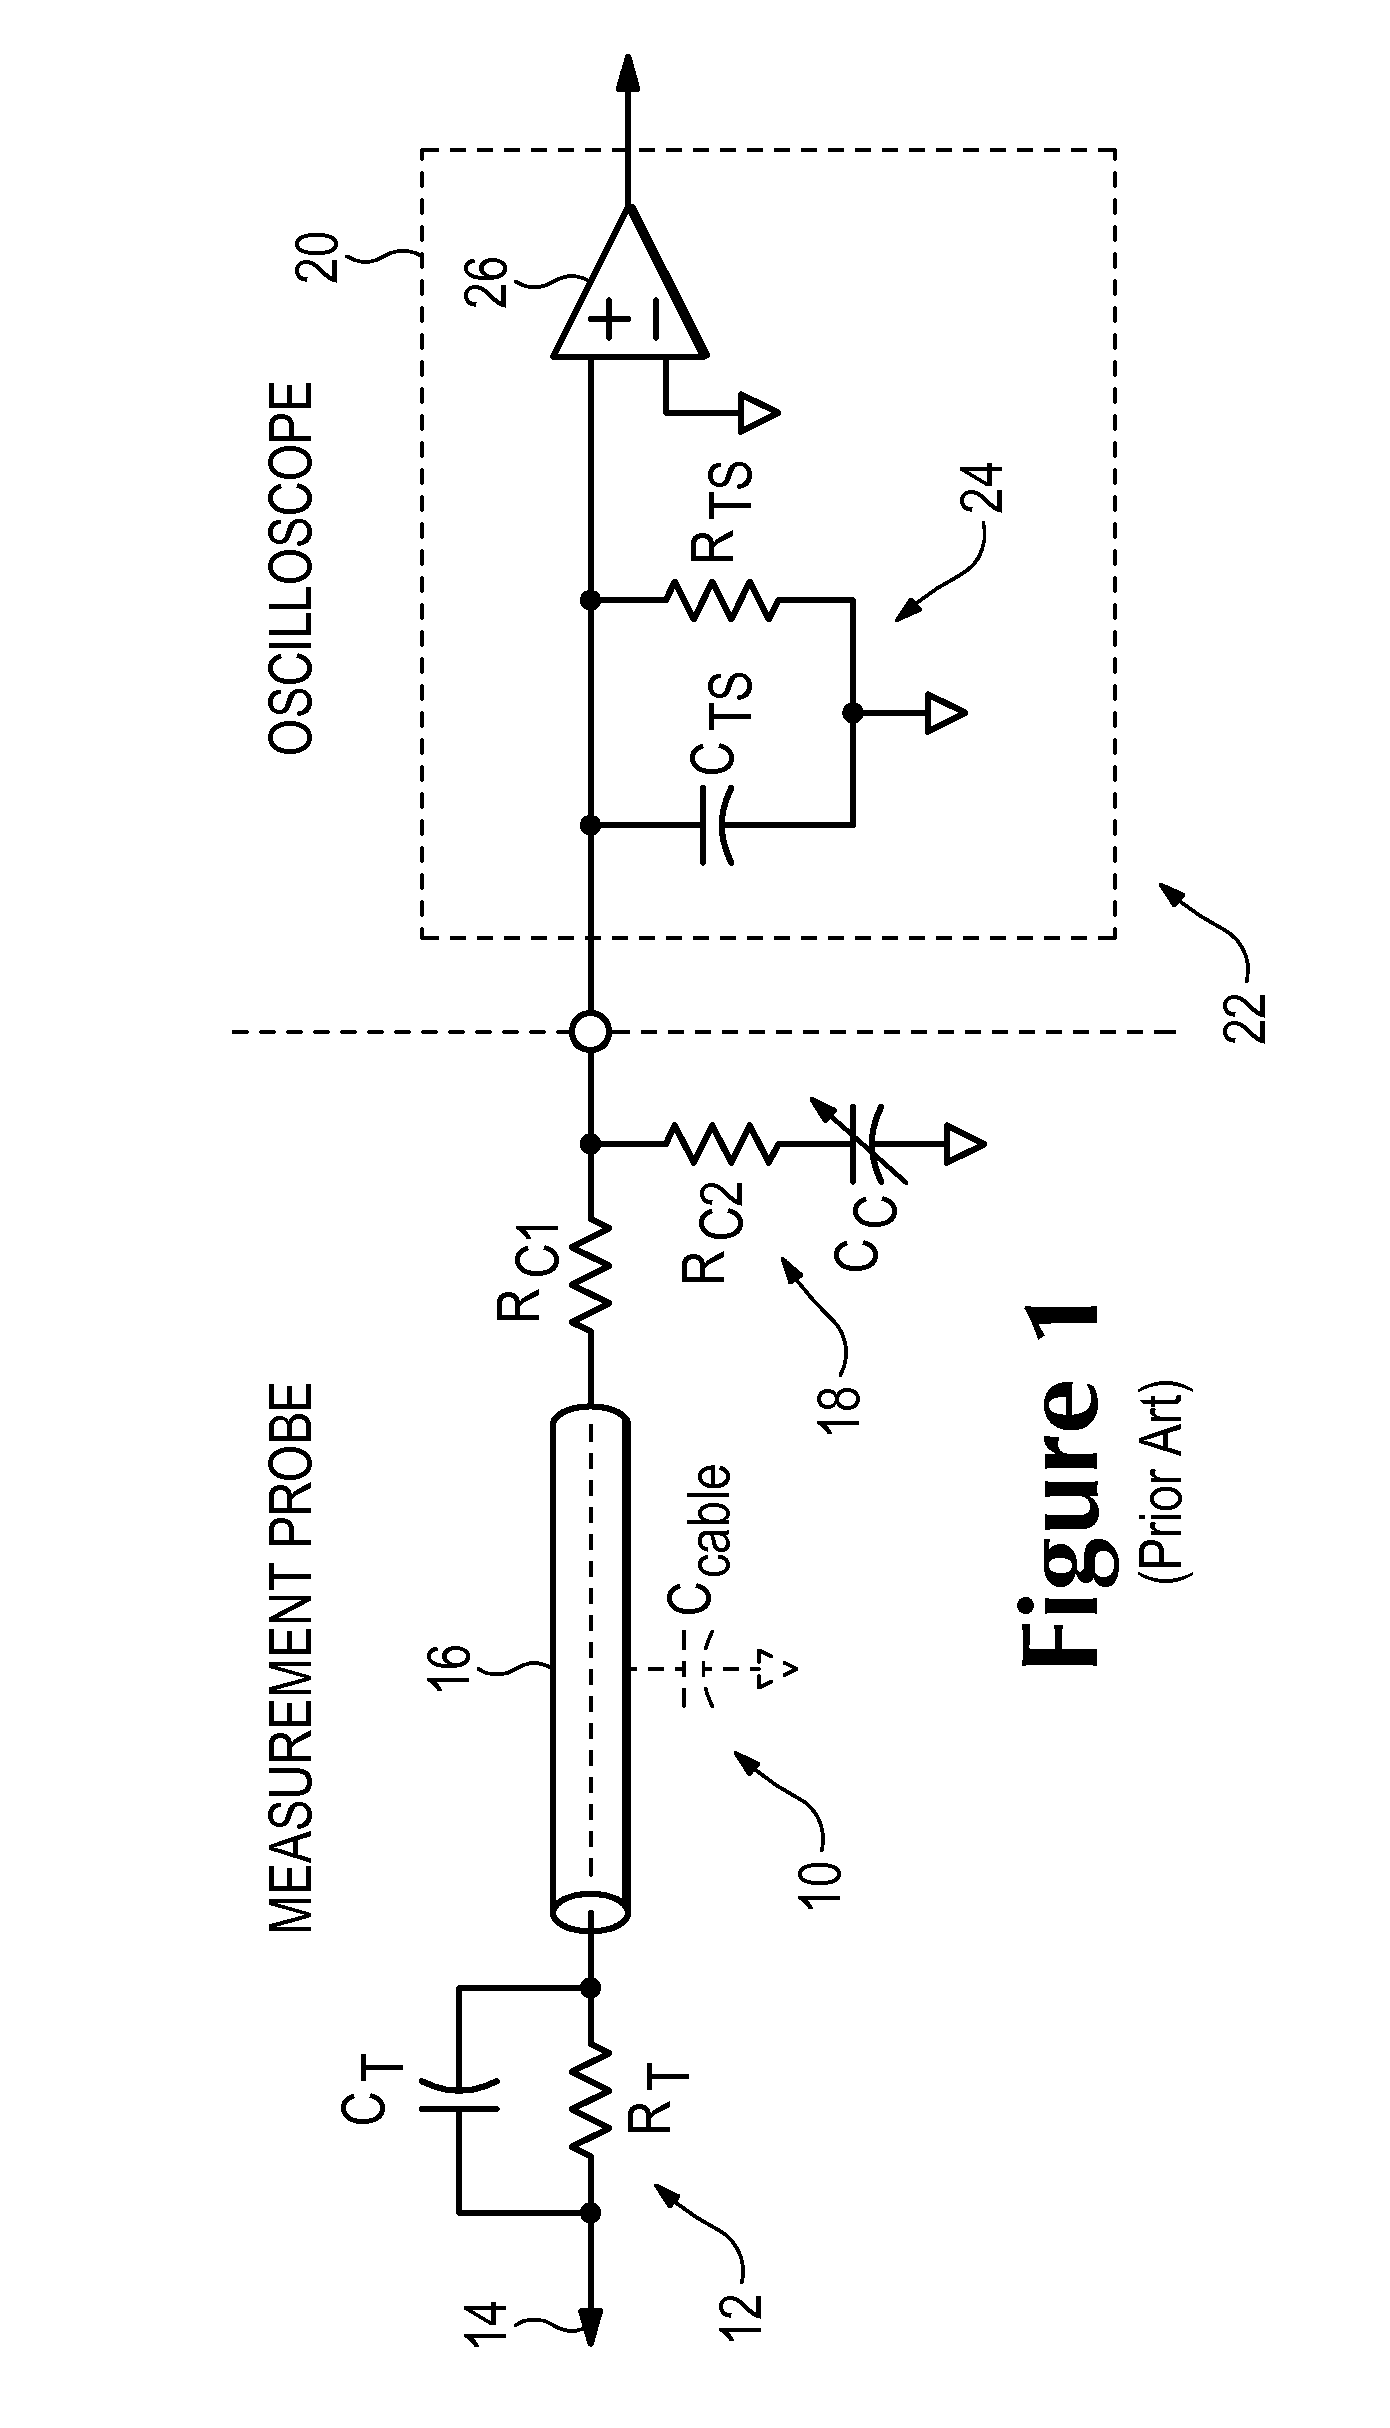 Signal Acquisition System Having Reduced Probe Loading of a Device Under Test